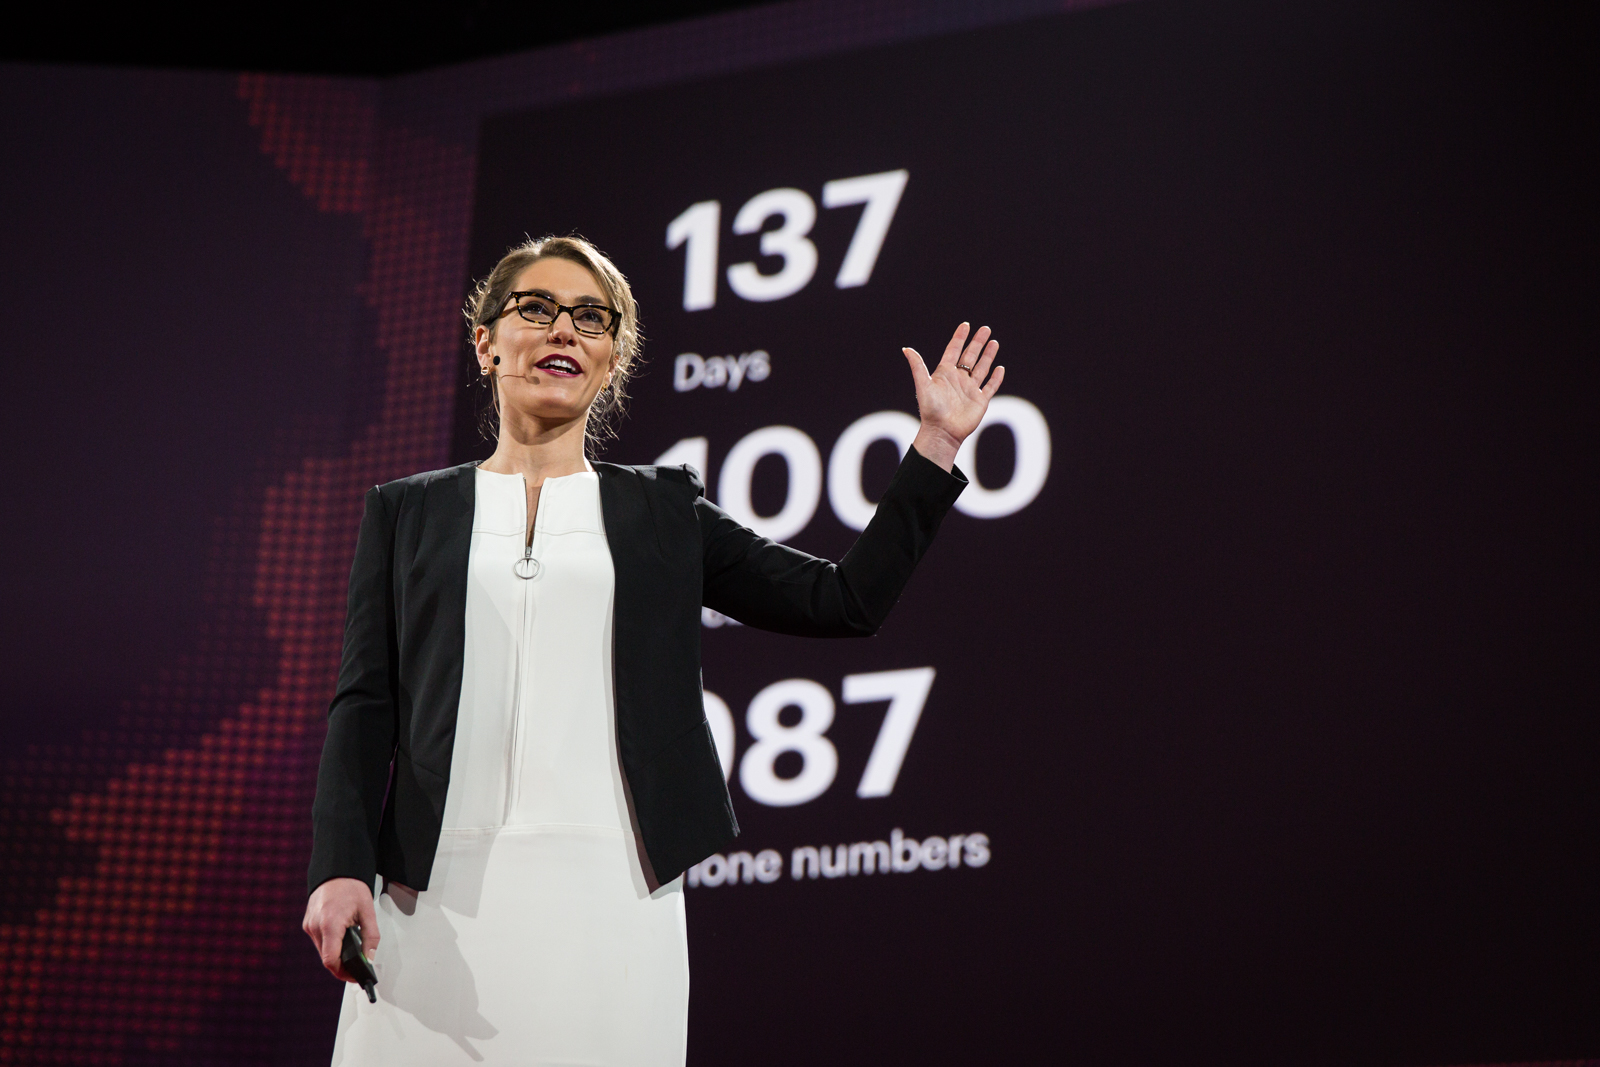 Haley Van Dyck speaks at TED2016 - Dream, February 15-19, 2016, Vancouver Convention Center, Vancouver, Canada. Photo: Bret Hartman / TED